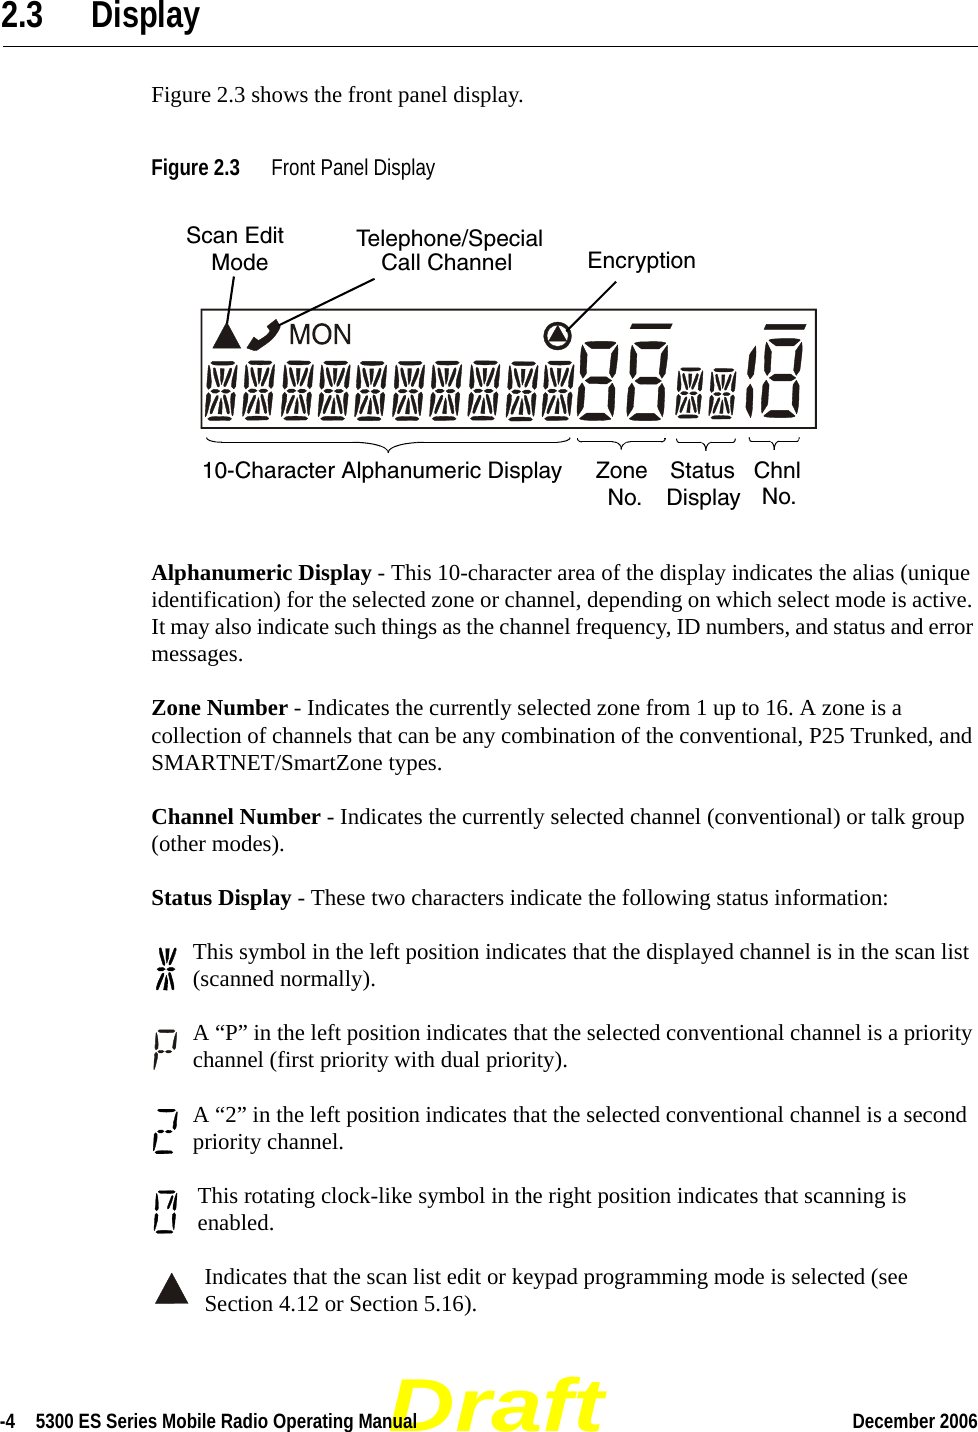 Draft-4  5300 ES Series Mobile Radio Operating Manual December 2006 2.3 DisplayFigure 2.3 shows the front panel display.Figure 2.3 Front Panel Display Alphanumeric Display - This 10-character area of the display indicates the alias (unique identification) for the selected zone or channel, depending on which select mode is active. It may also indicate such things as the channel frequency, ID numbers, and status and error messages.Zone Number - Indicates the currently selected zone from 1 up to 16. A zone is a collection of channels that can be any combination of the conventional, P25 Trunked, and SMARTNET/SmartZone types.Channel Number - Indicates the currently selected channel (conventional) or talk group (other modes).Status Display - These two characters indicate the following status information:This symbol in the left position indicates that the displayed channel is in the scan list (scanned normally).A “P” in the left position indicates that the selected conventional channel is a priority channel (first priority with dual priority).A “2” in the left position indicates that the selected conventional channel is a second priority channel. This rotating clock-like symbol in the right position indicates that scanning is enabled. Indicates that the scan list edit or keypad programming mode is selected (see Section 4.12 or Section 5.16).Telephone/SpecialCall Channel Encryption10-Character Alphanumeric Display ZoneNo.StatusDisplayChnlNo.Scan EditMode